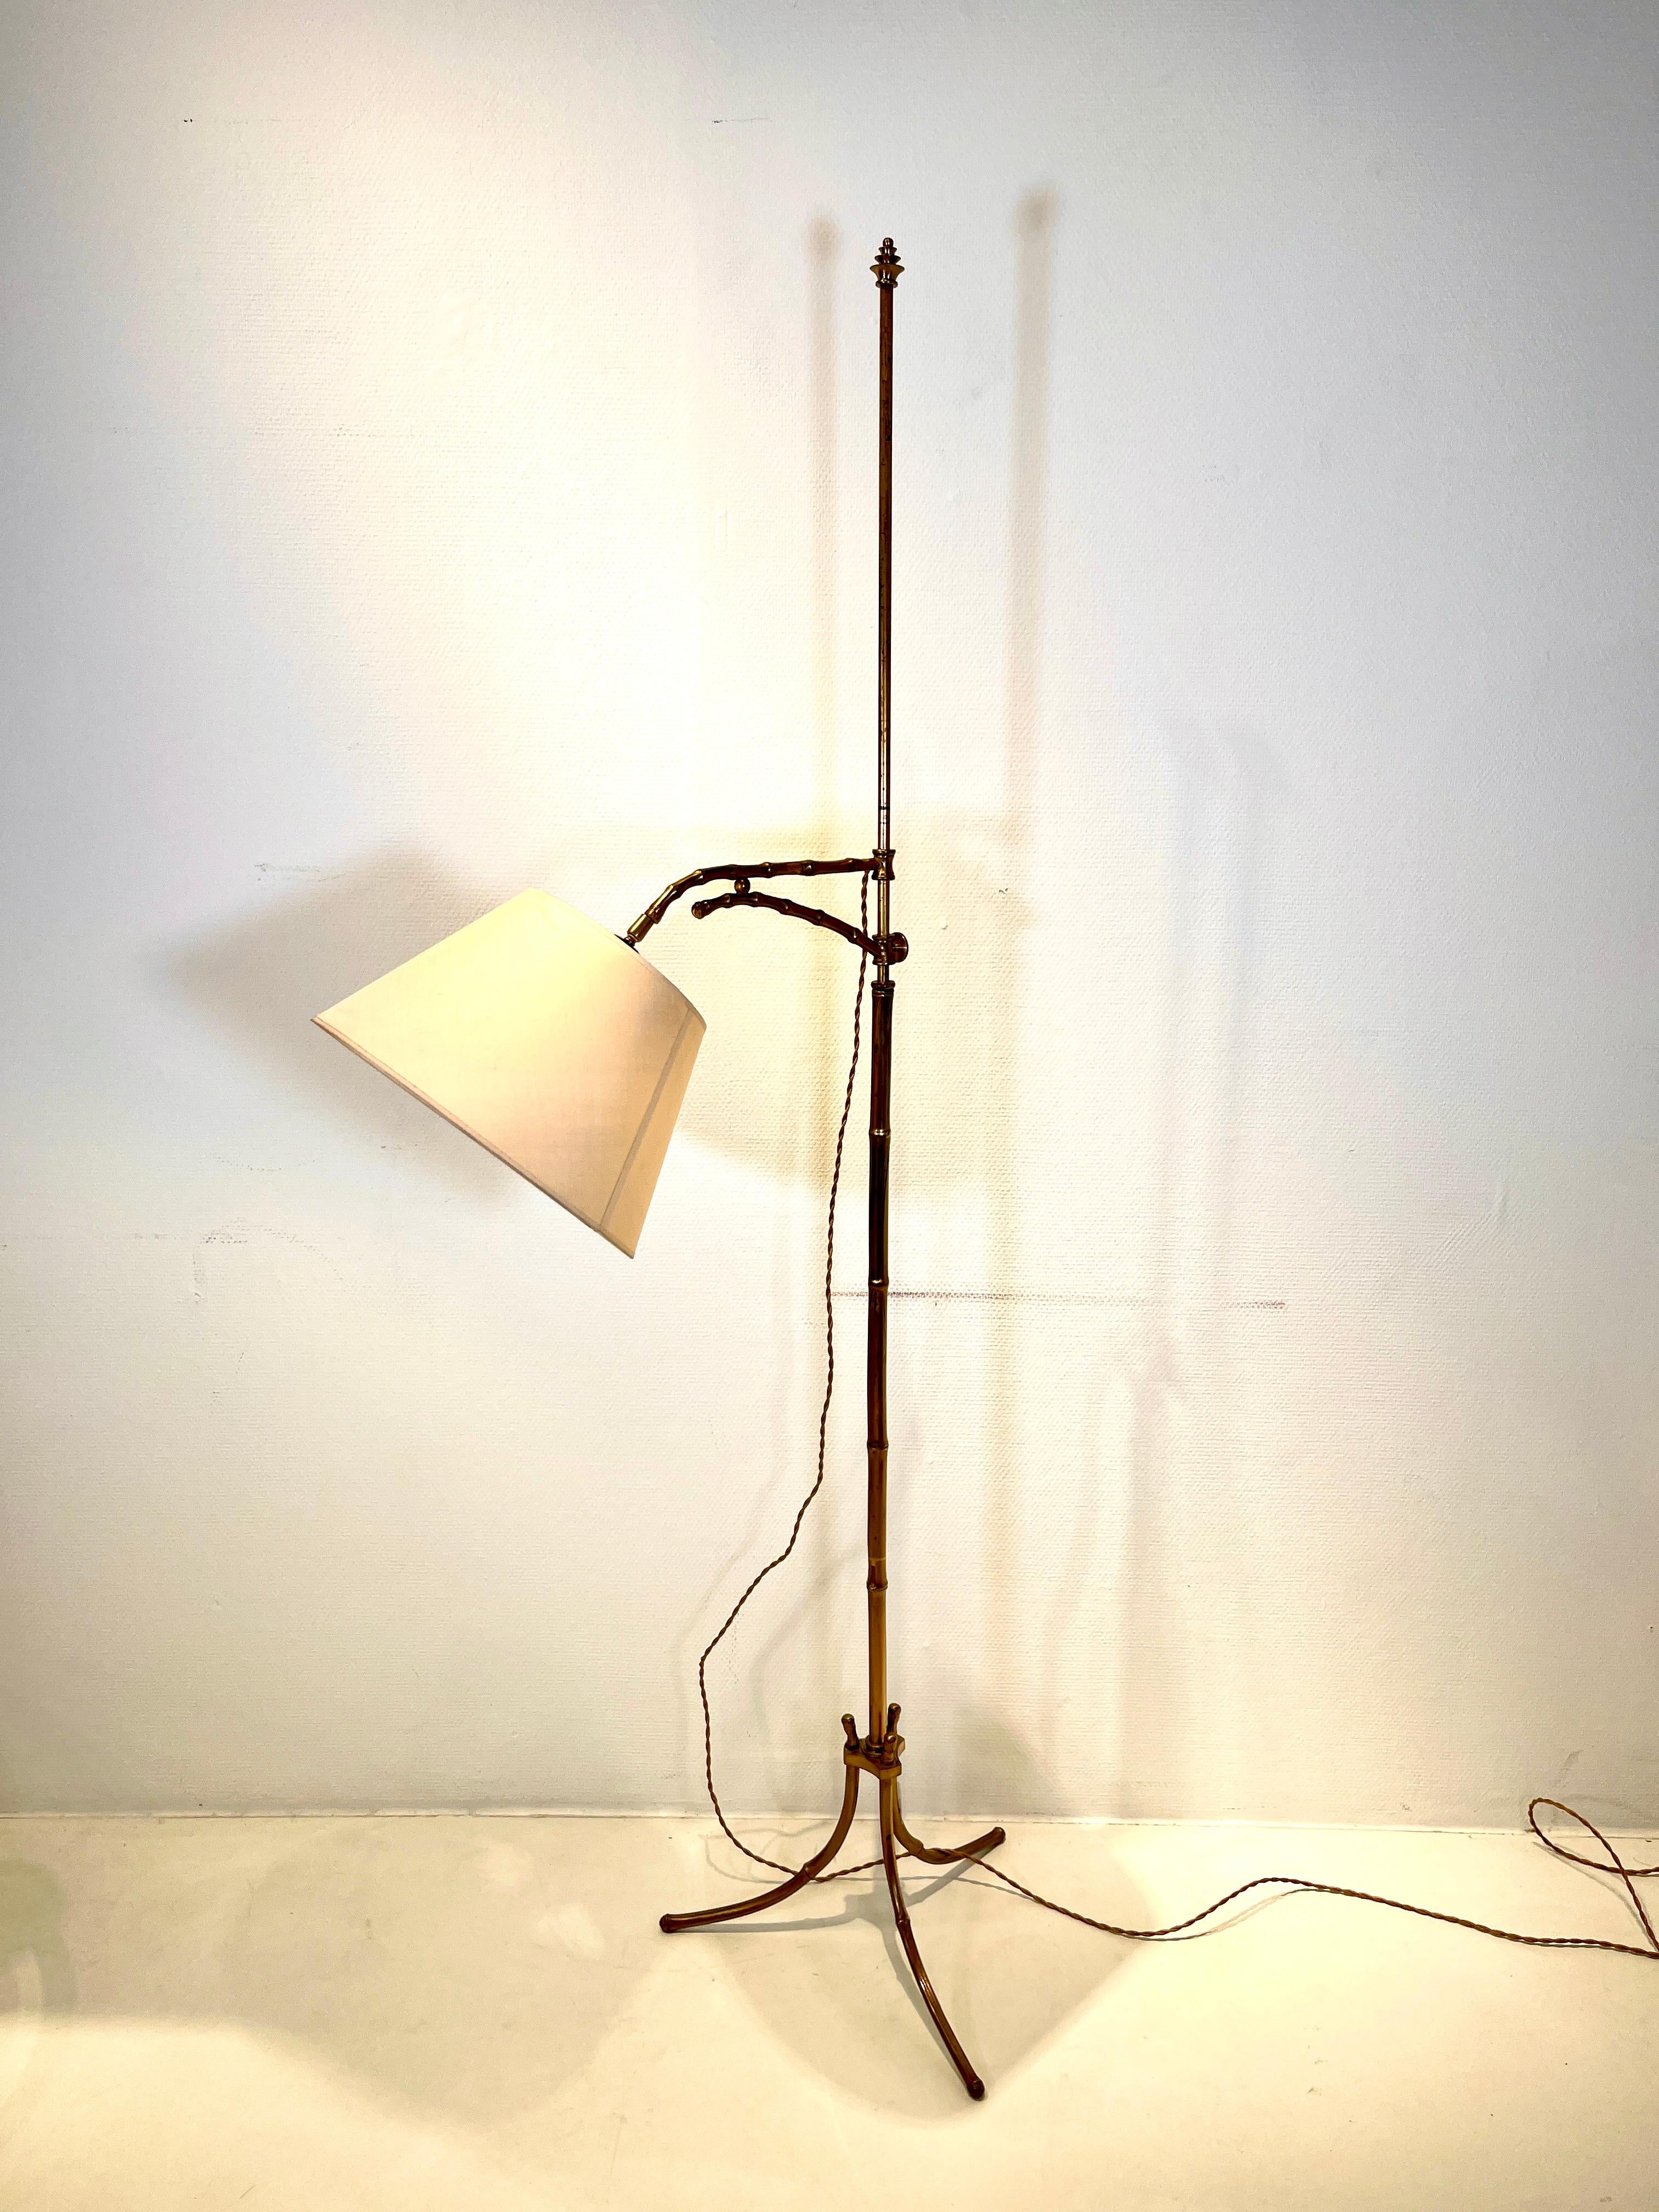 Adjustable model floor lamp, reading light, bronze fake bamboo by Maison Baguès. Never seen before. new shade and rewired.